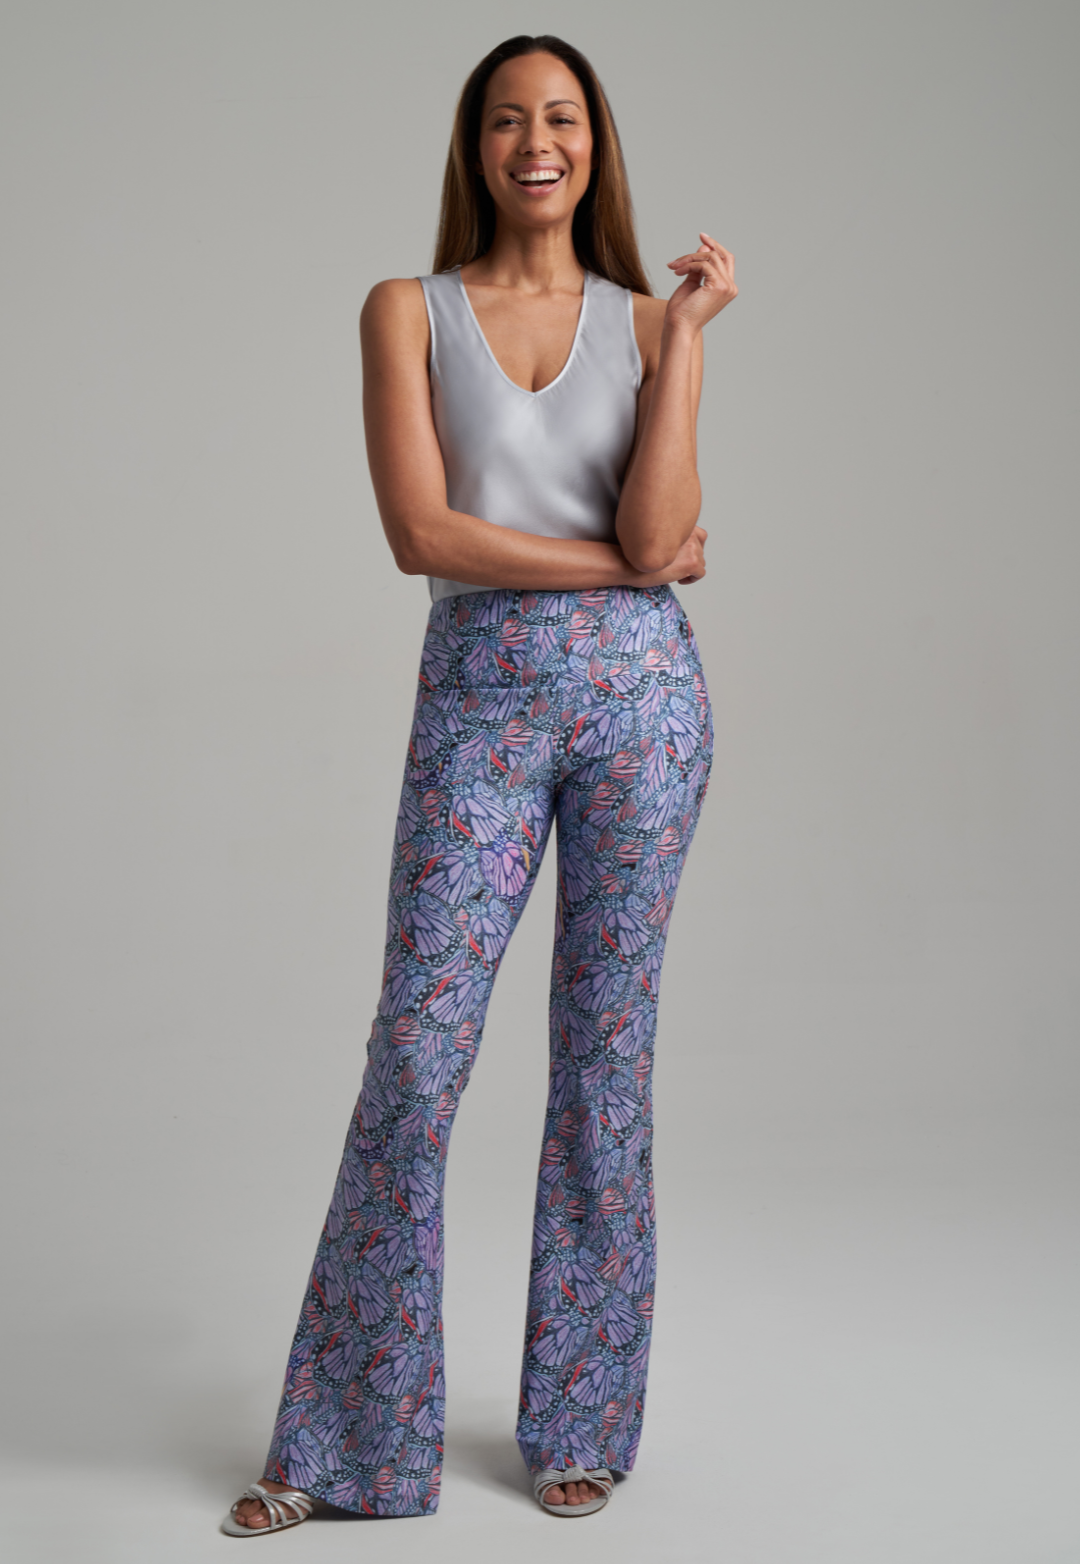 Woman wearing butterfly printed stretch knit purple pants by Ala von Auersperg for spring summer 2021